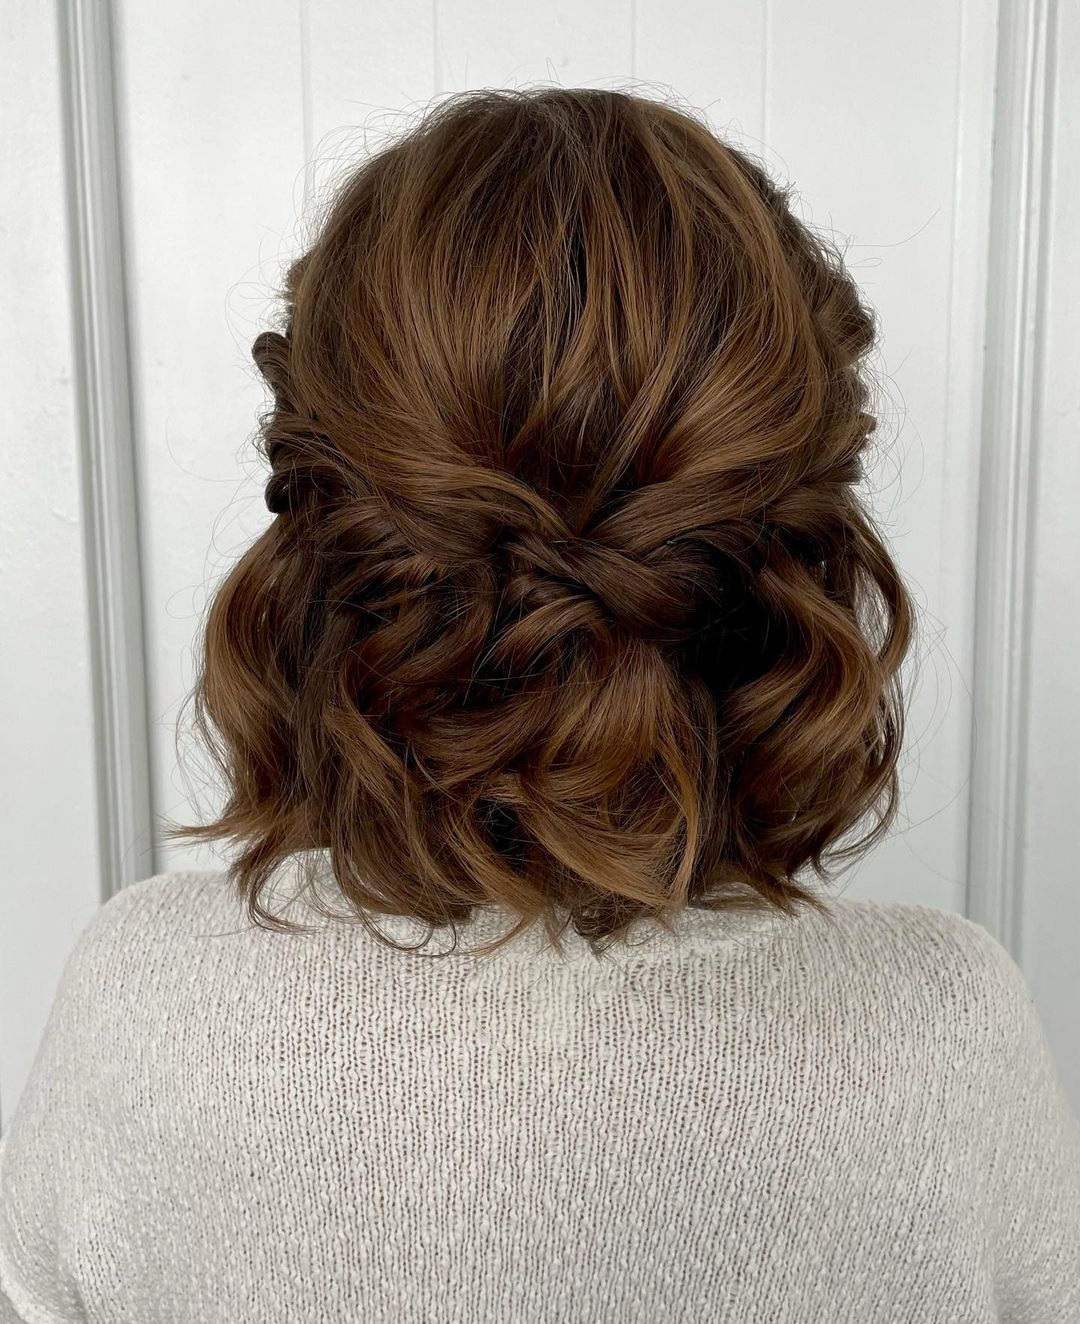 Crisscross hairstyle for gown for short hair - gown hairstyles for short hair